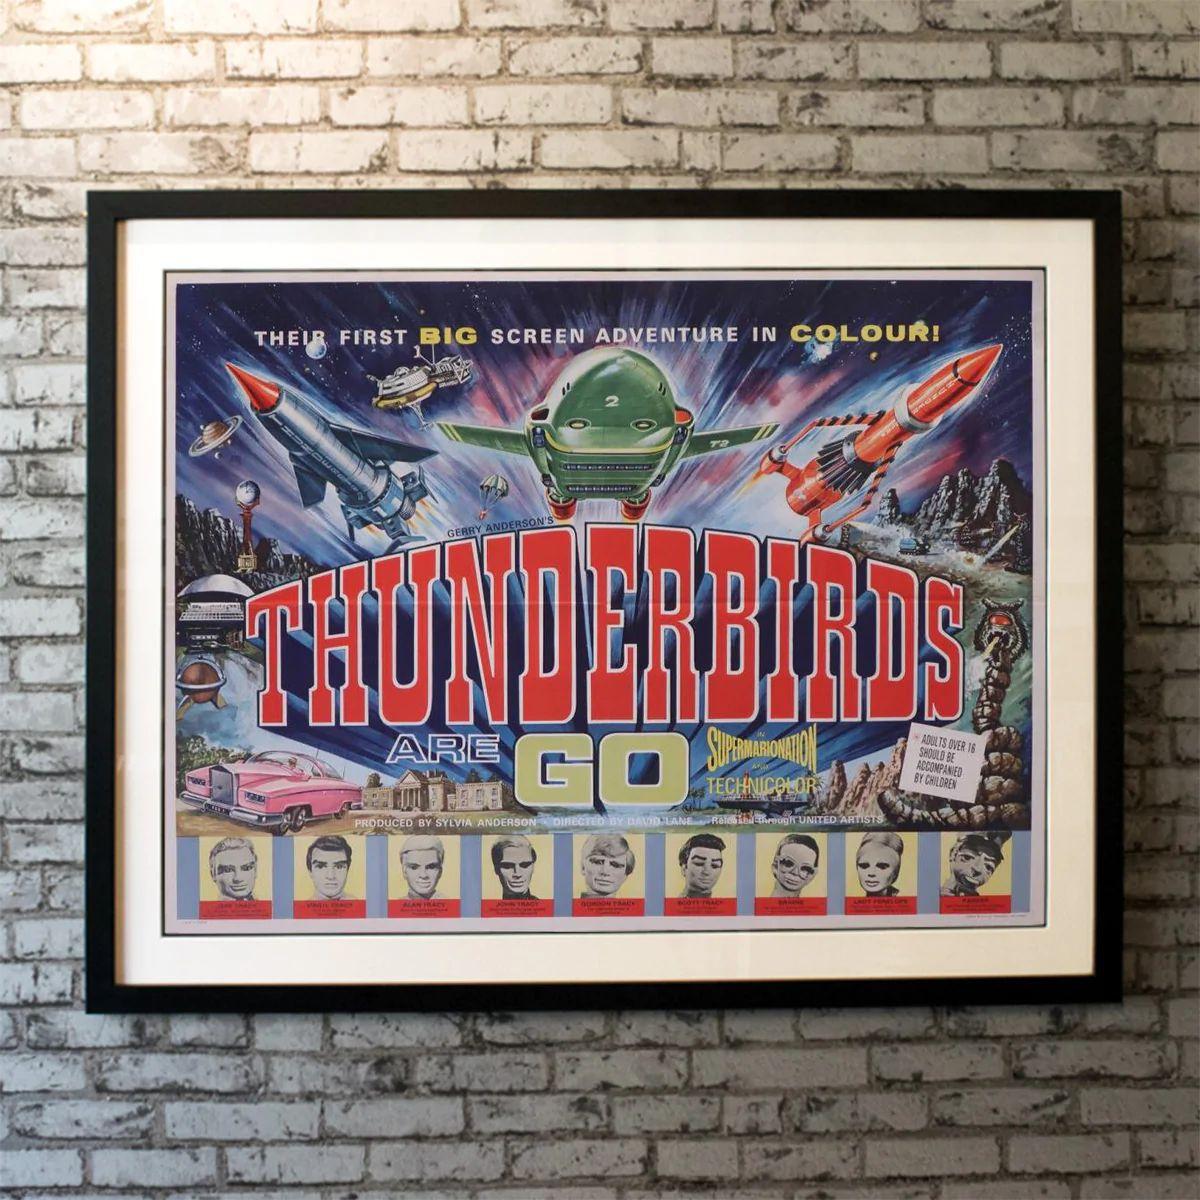 Thunderbirds Are Go, Unframed Poster, 1966

Original British Quad (30 X 40 Inches). When the launch of a mission to Mars goes awry due to sabotage, International Rescue is requested to assist in the mission's second attempt.

Year: